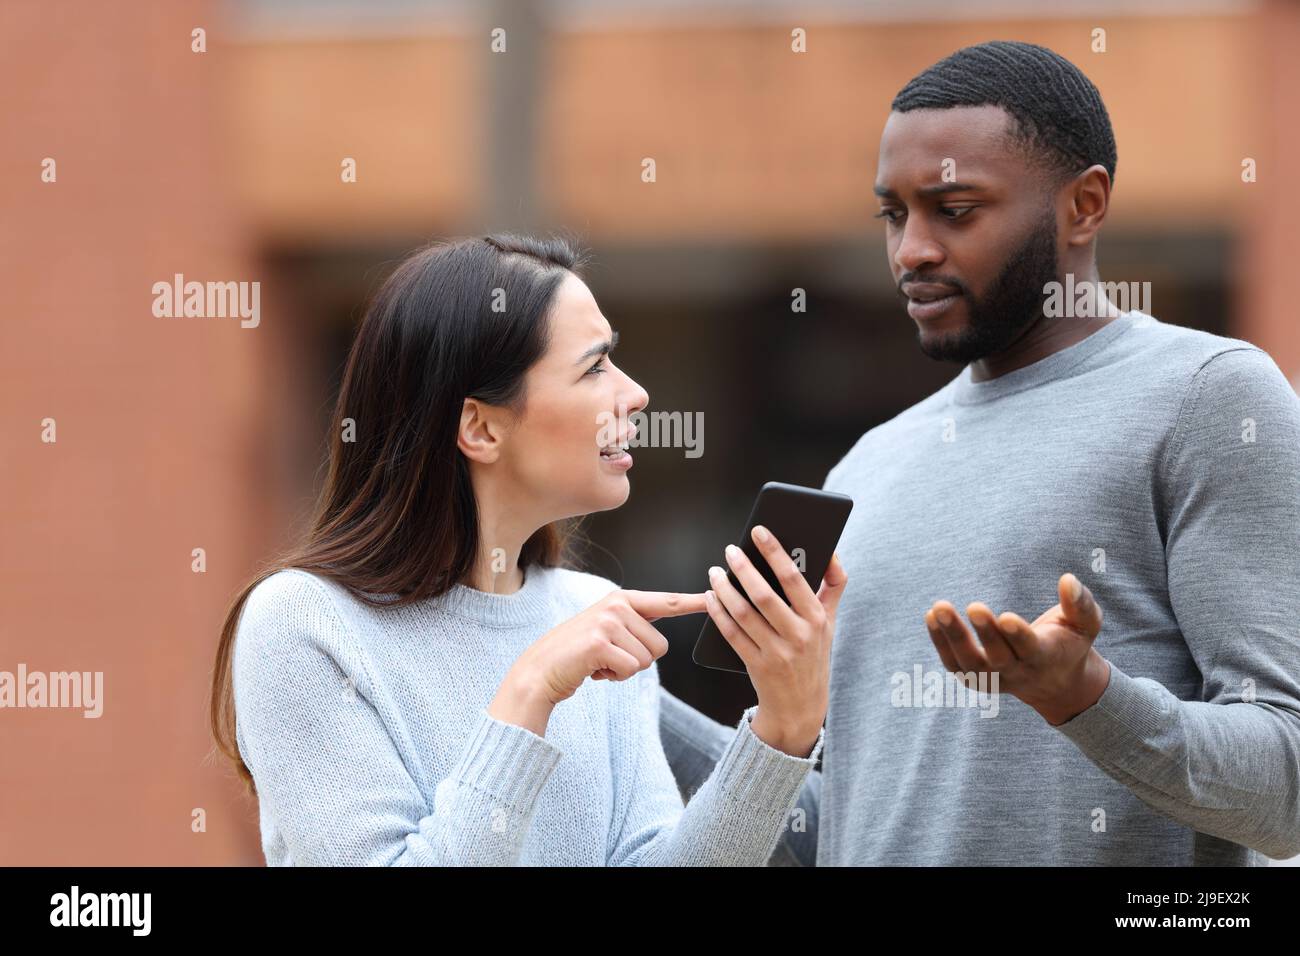 Disgusted woman asking for explanation about mobile phone text to a man in the street Stock Photo